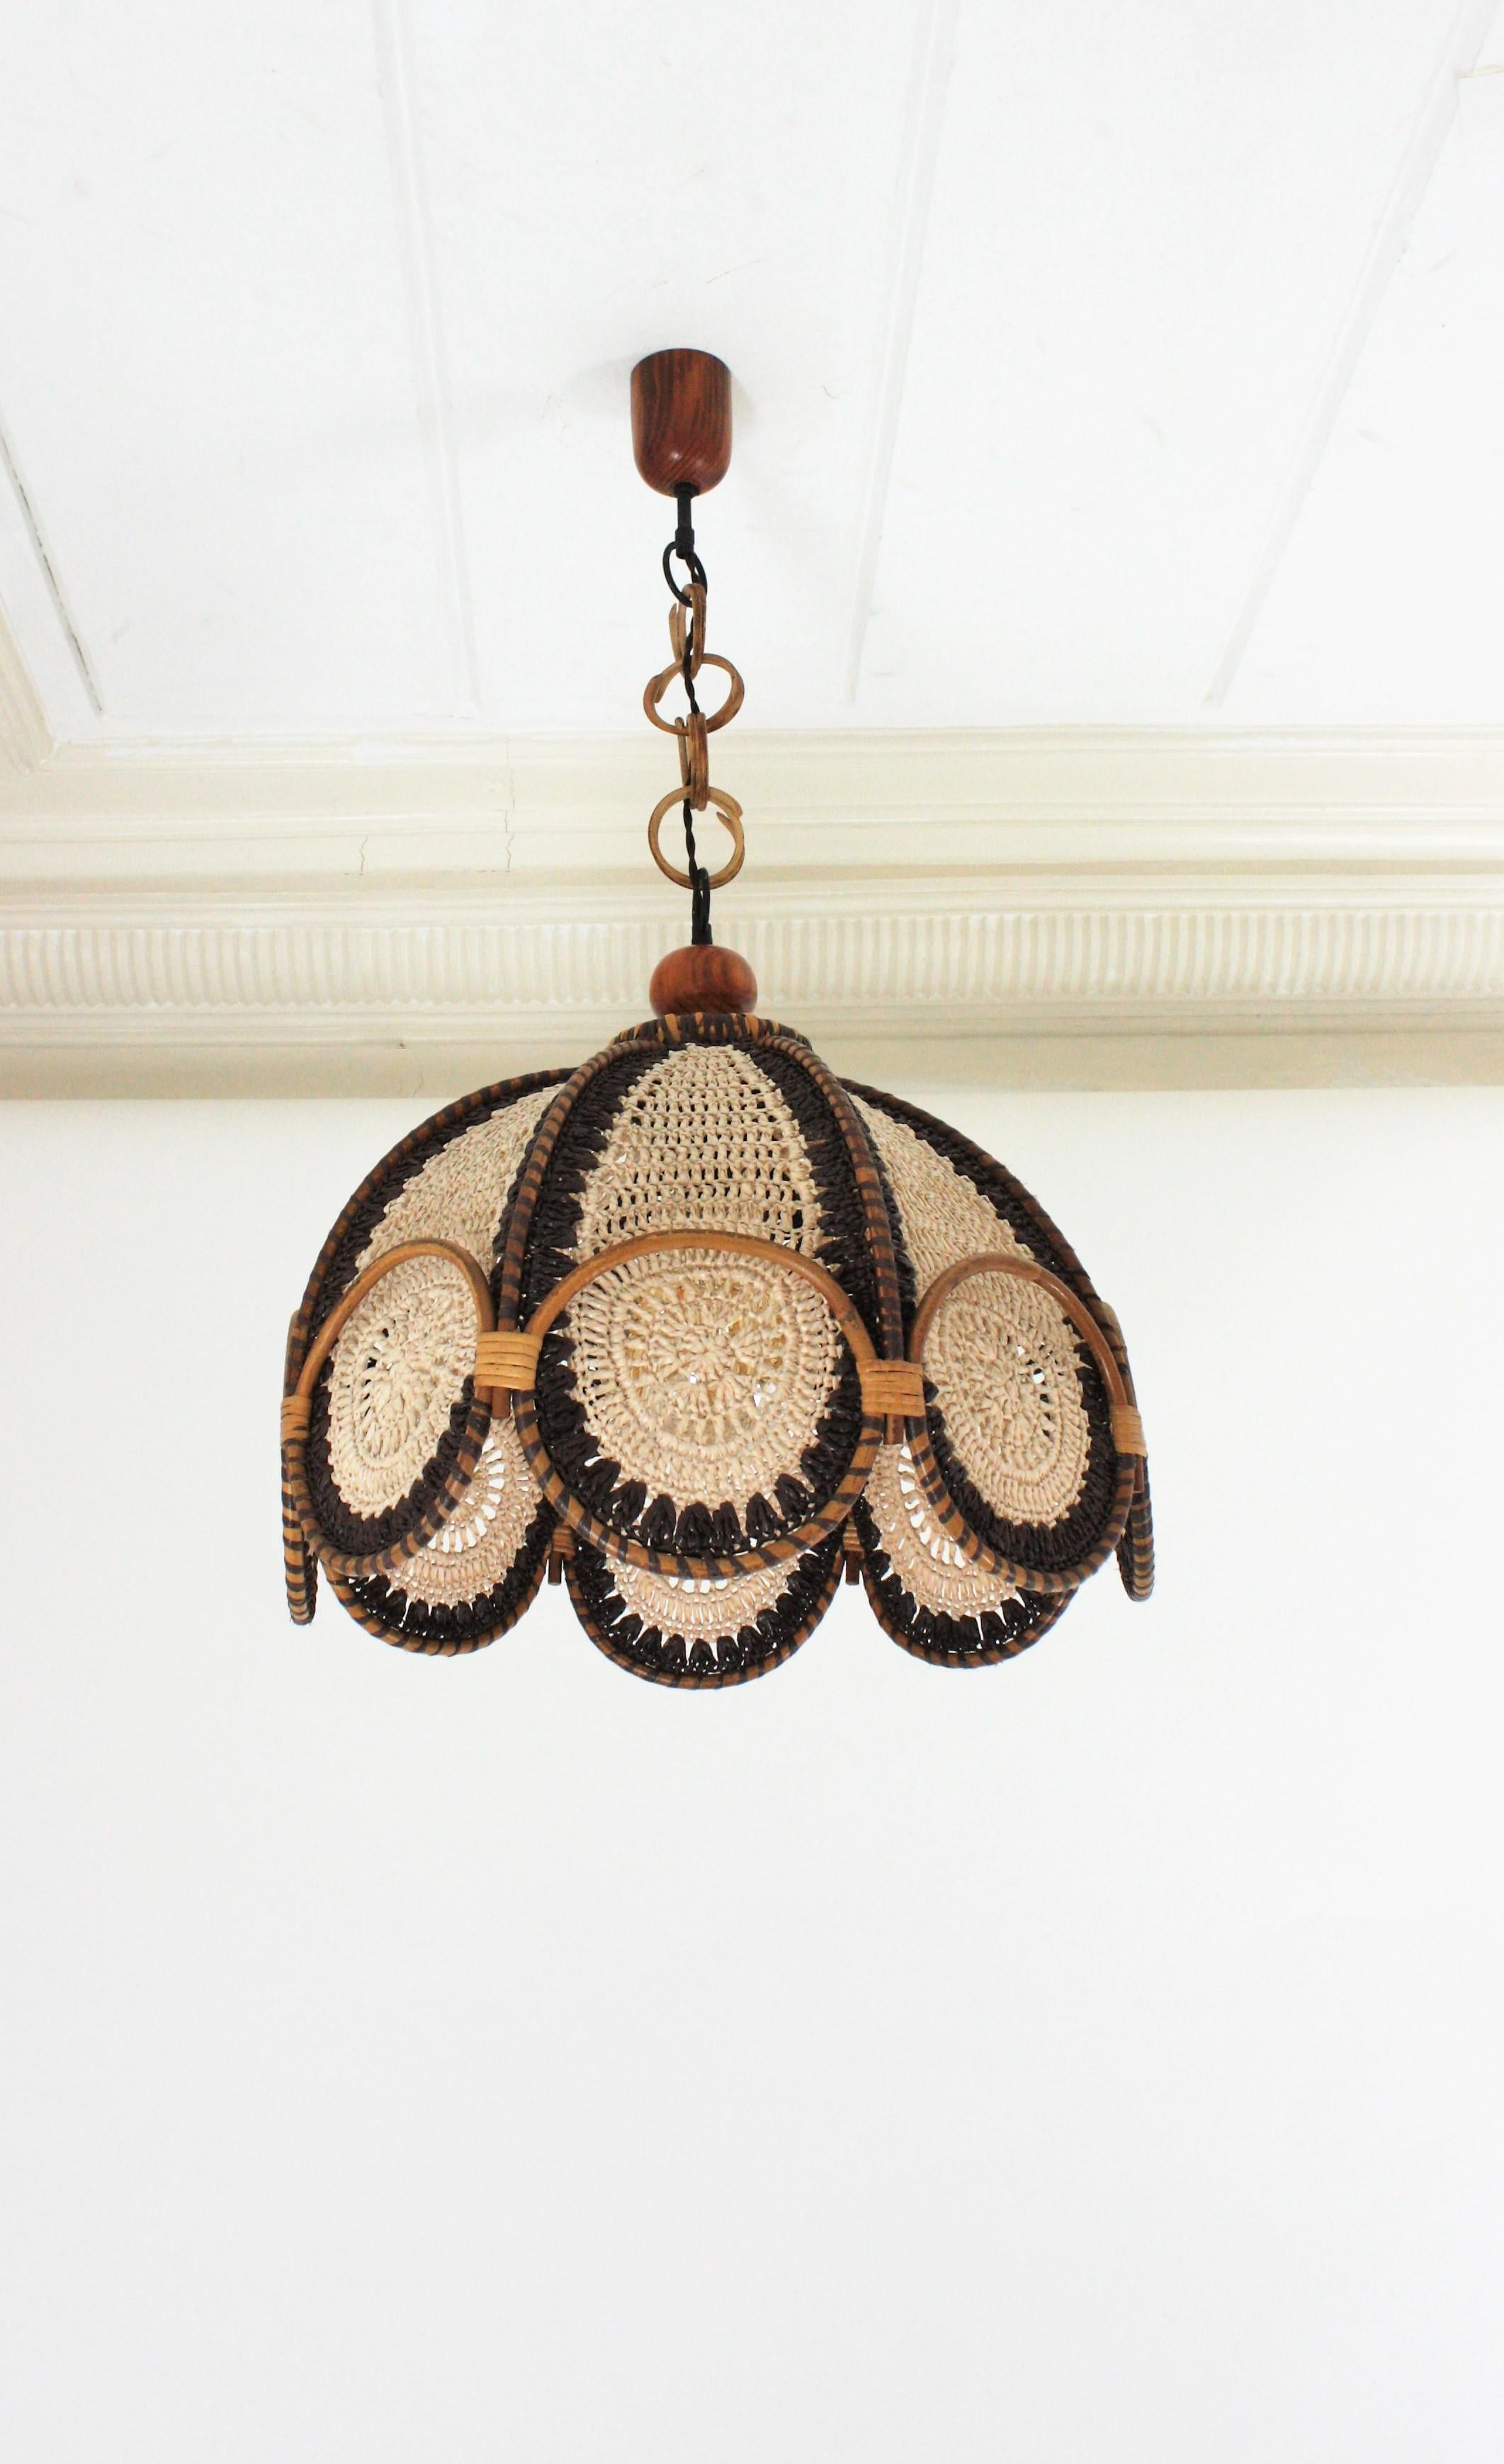 Spanish Modernist Beige Brown Macramé Large Pendant Lamp with Rattan Rings For Sale 4